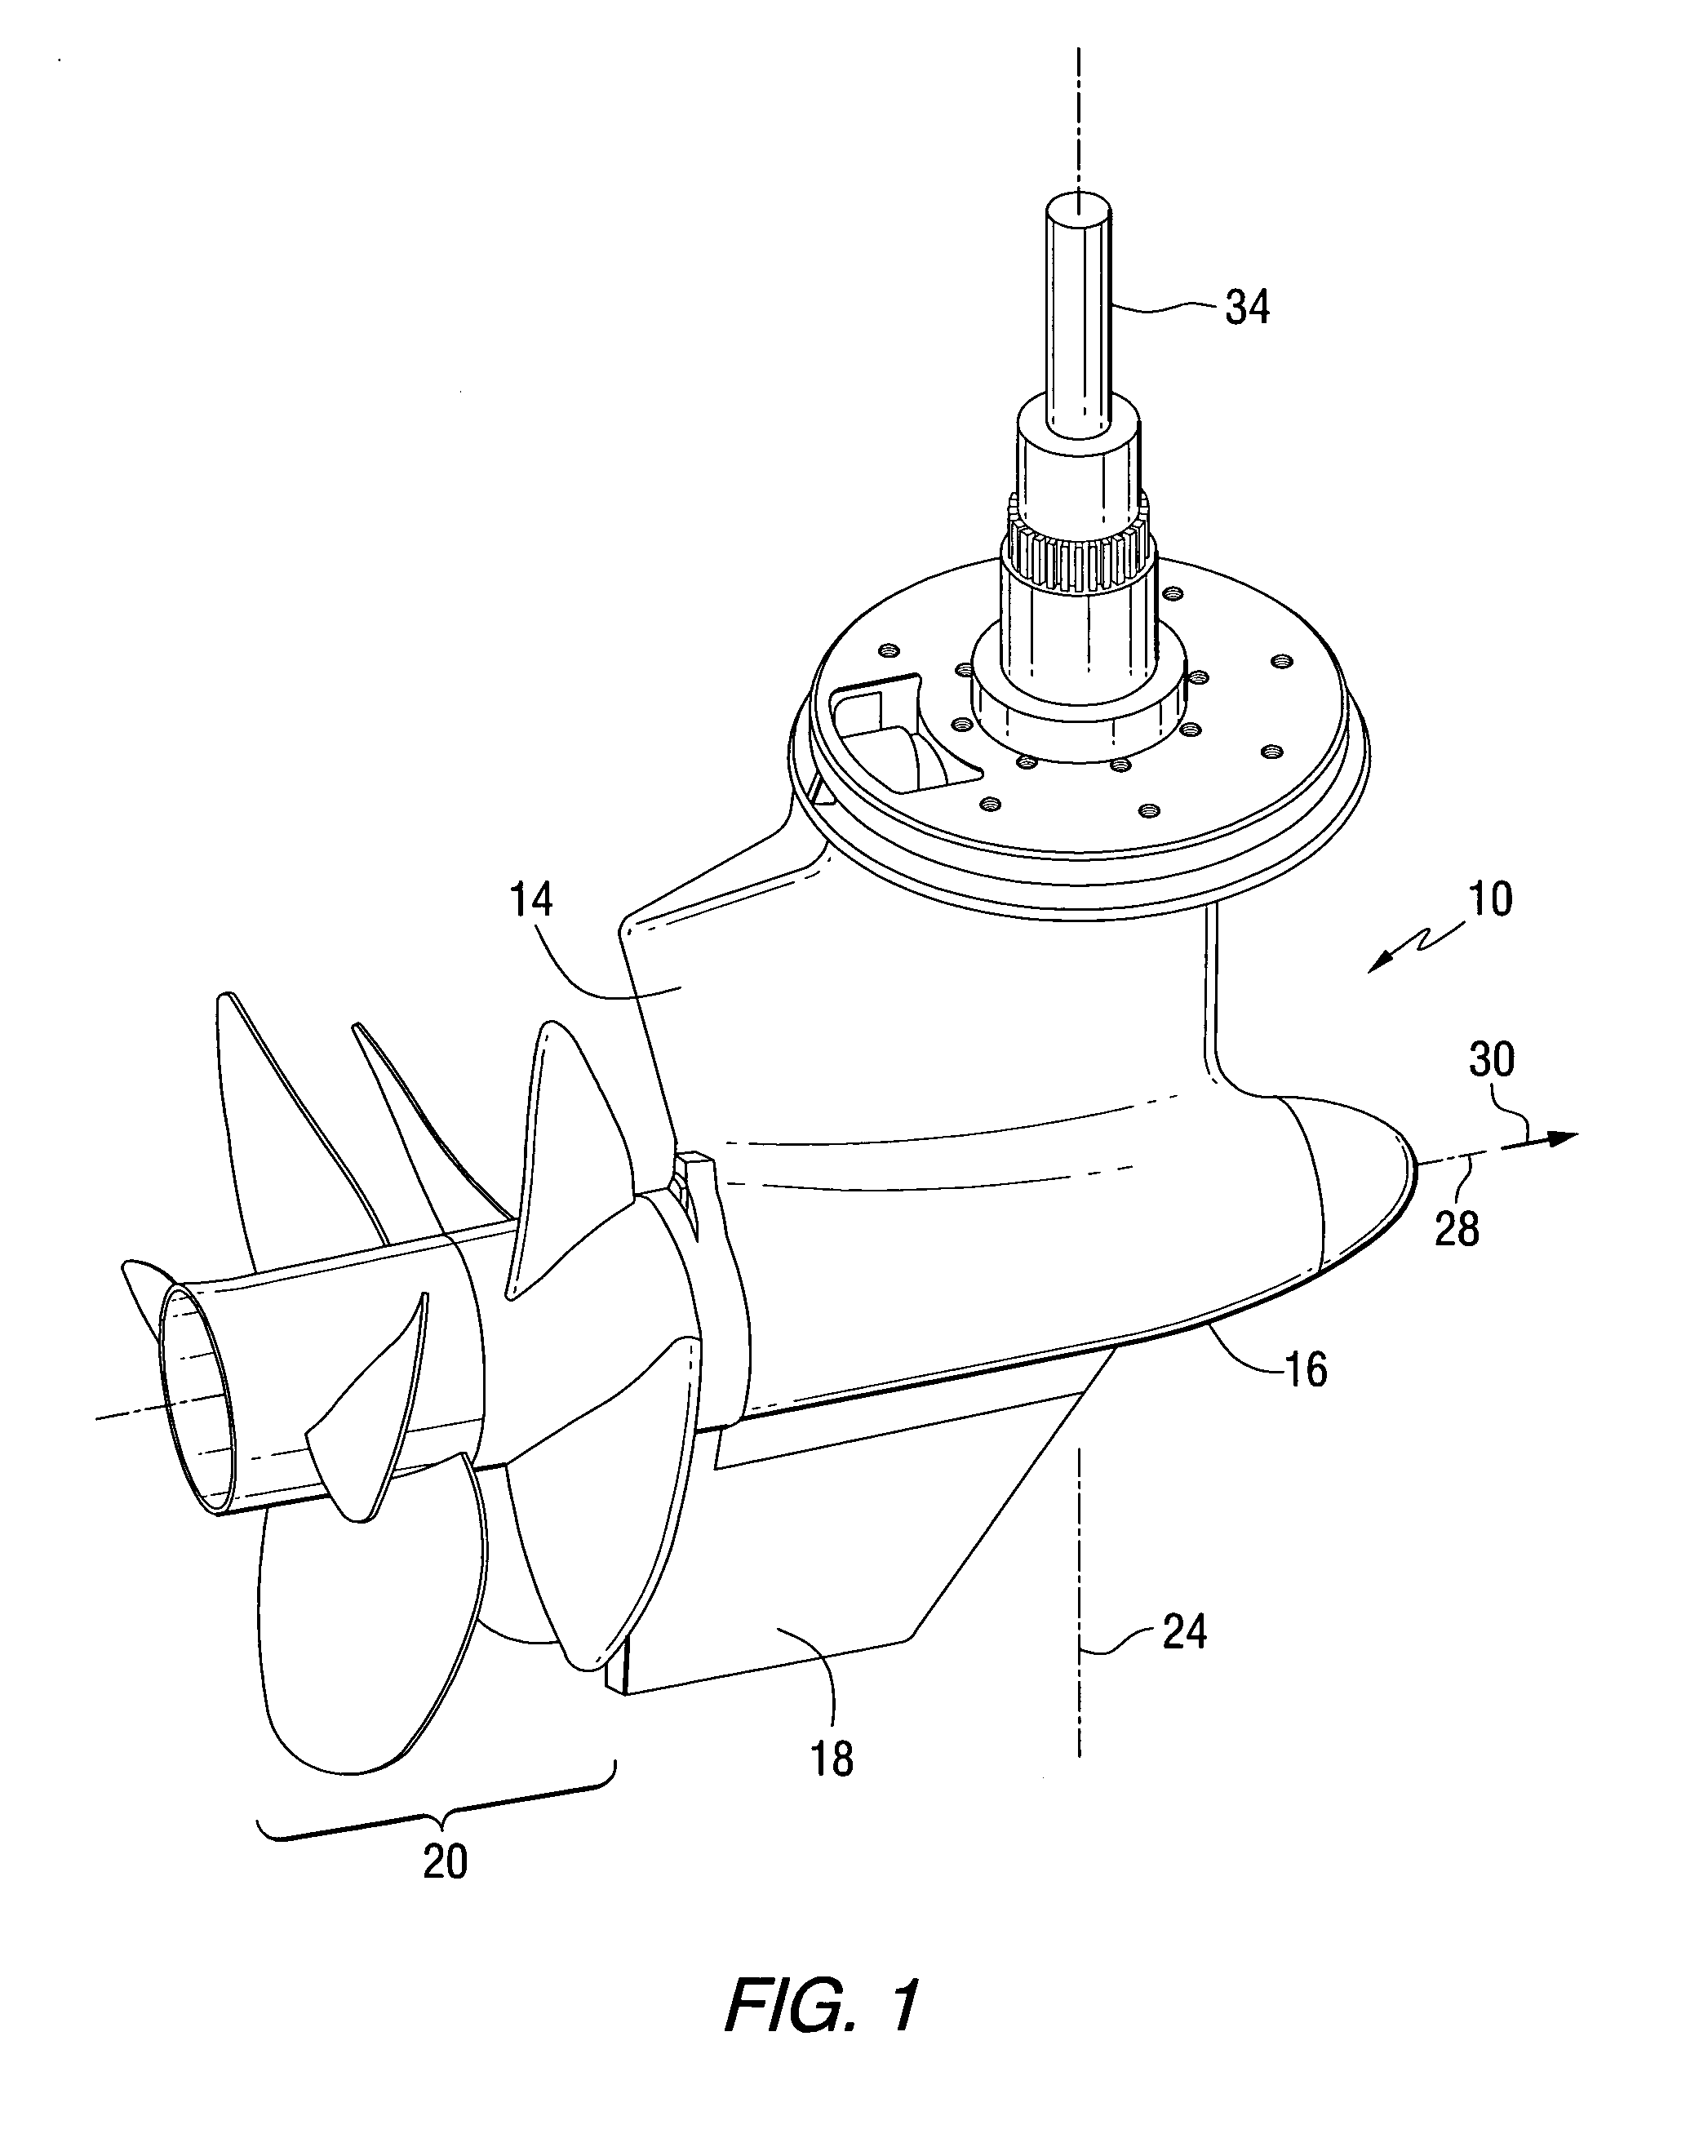 Method for braking a vessel with two marine propulsion devices